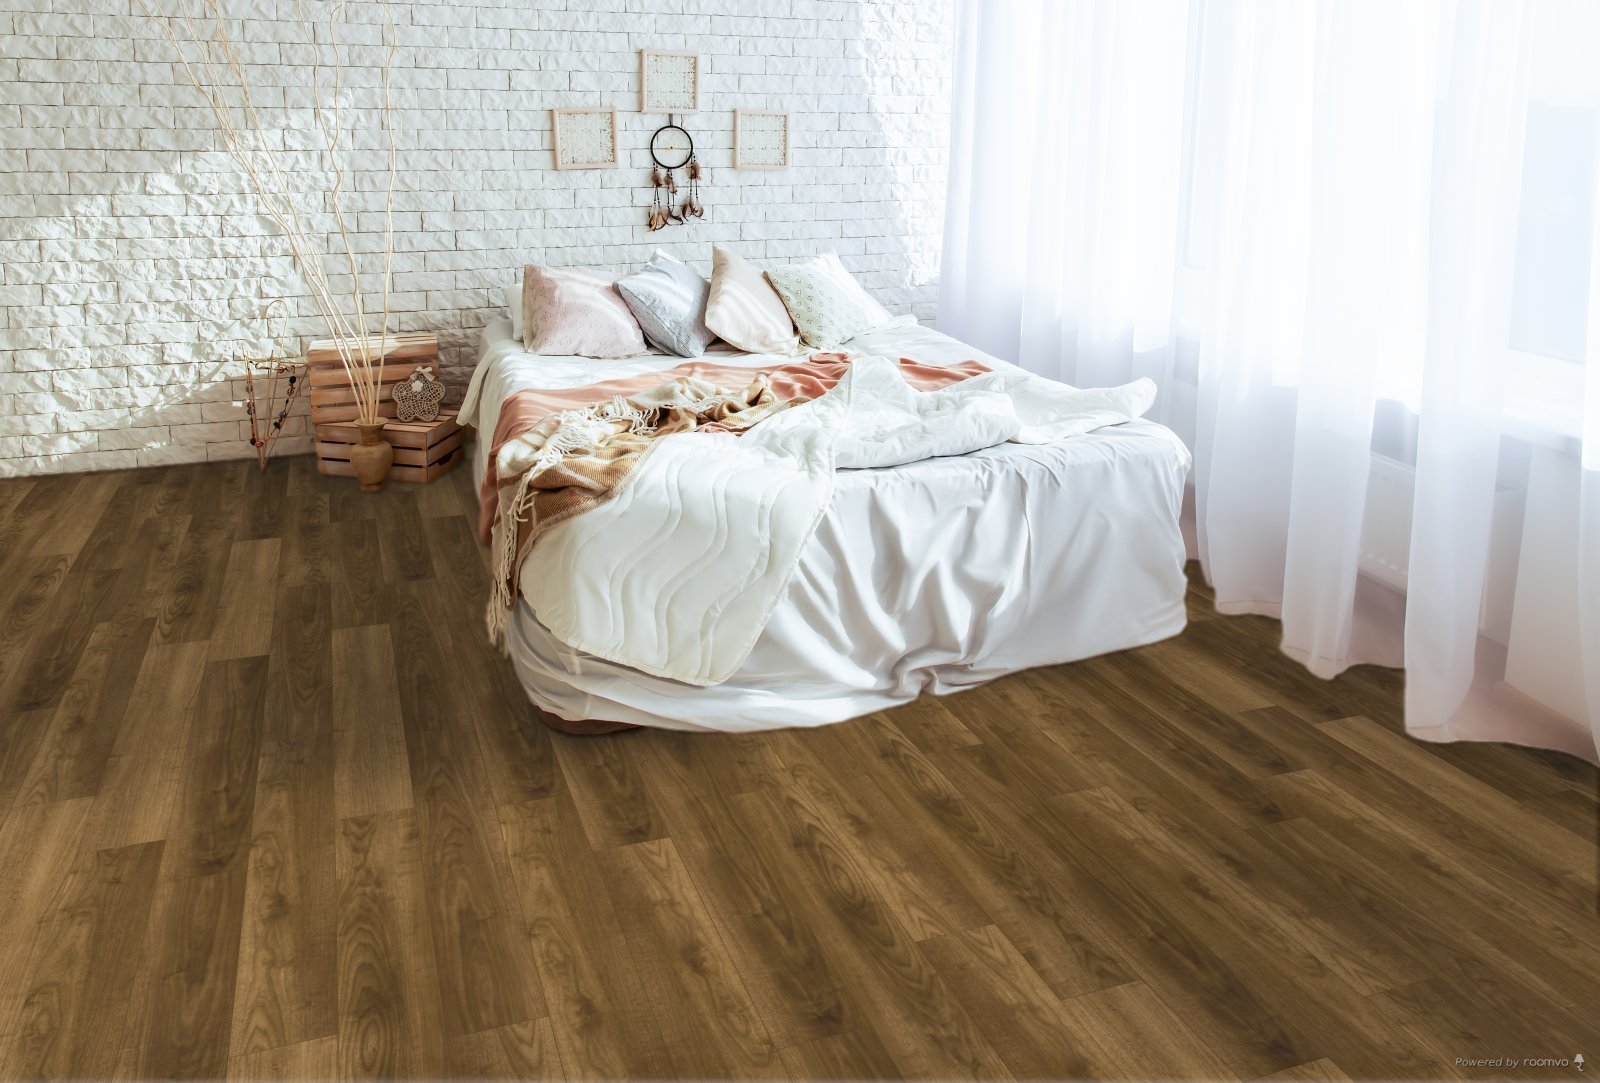 Horizen Flooring presents to you a picture of a quality wide plank Alton luxury vinyl plank. NovoCore Q Merengue collection features a wide range of colors & designs that will compliment any interior. Natural wood grain synchronized surface allow for an authentic hardwood look & feel. This collection features a 0.3″ / 7.5 mm overall thickness and a durable 22 mil / 0.55 mm wear layer for residential and commercial applications.